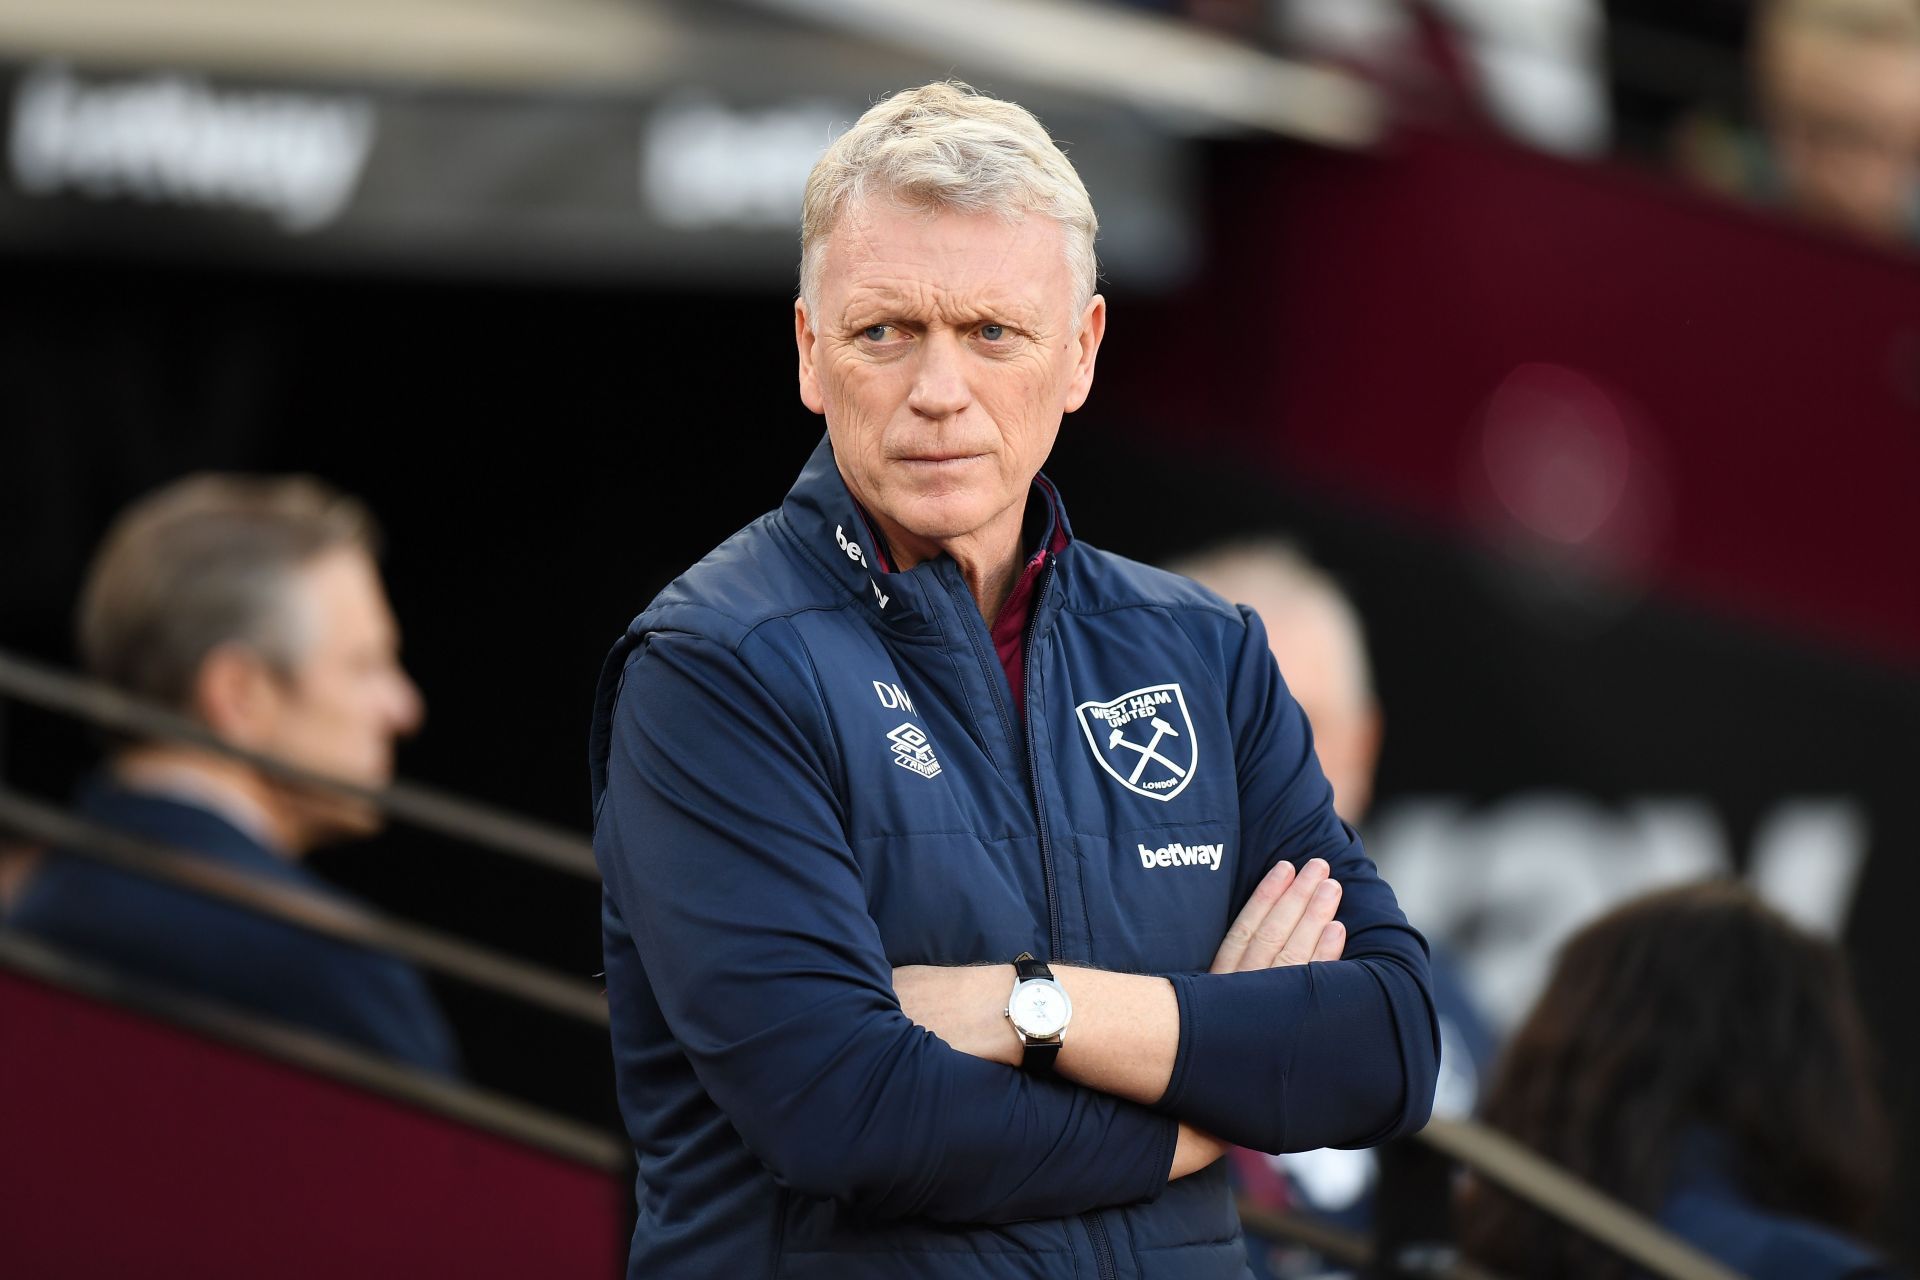 David Moyes guided West Ham United to a seventh-place finish in the 2021-22 Premier League season